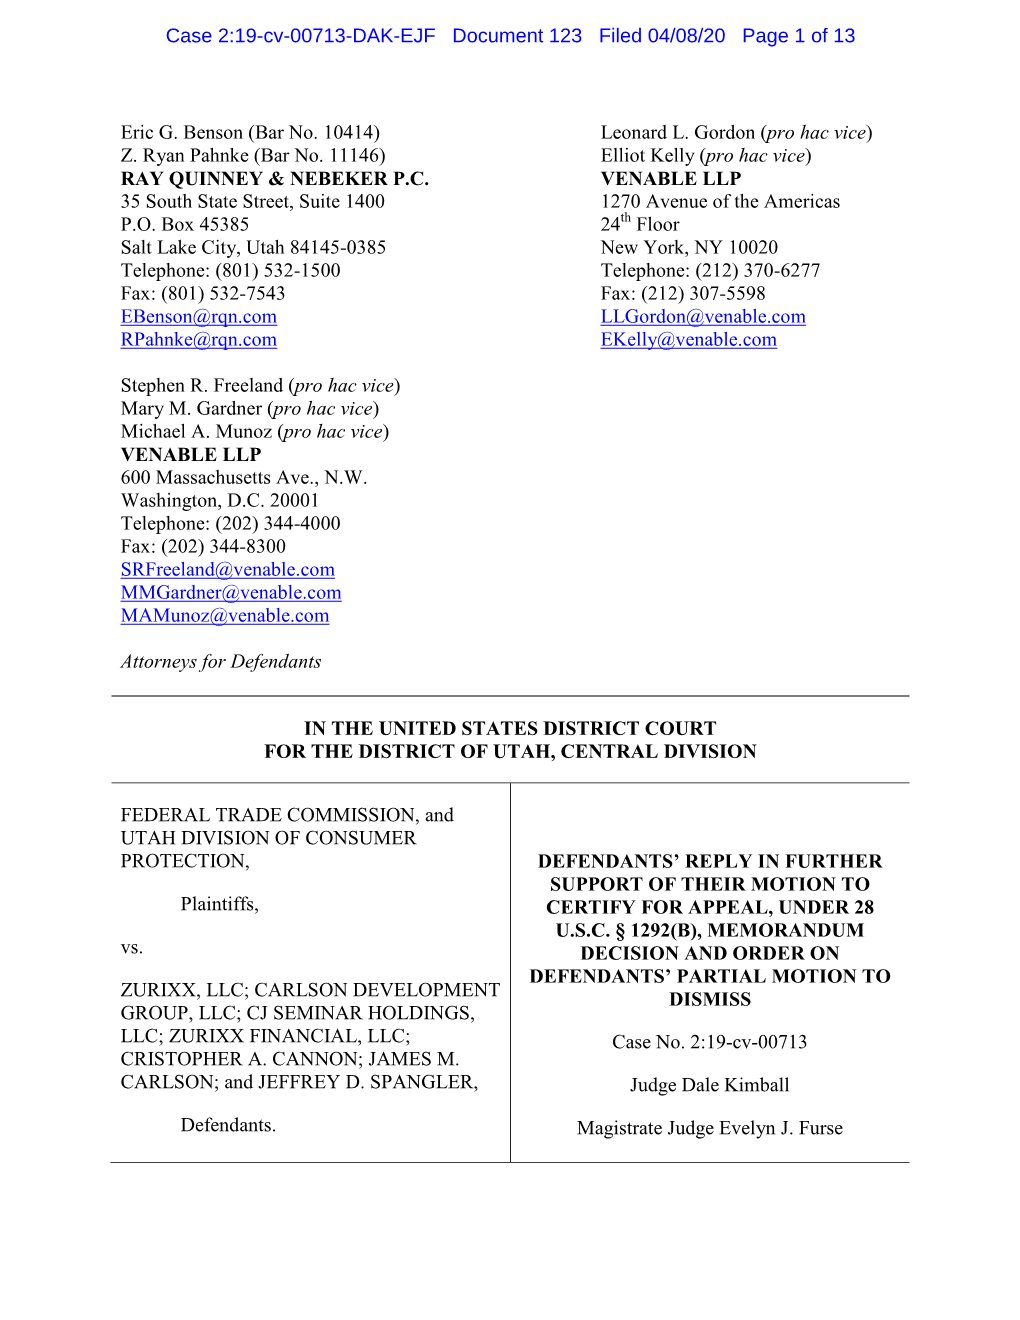 2020-04-08No123 Defendants' Reply in Support of Motion To